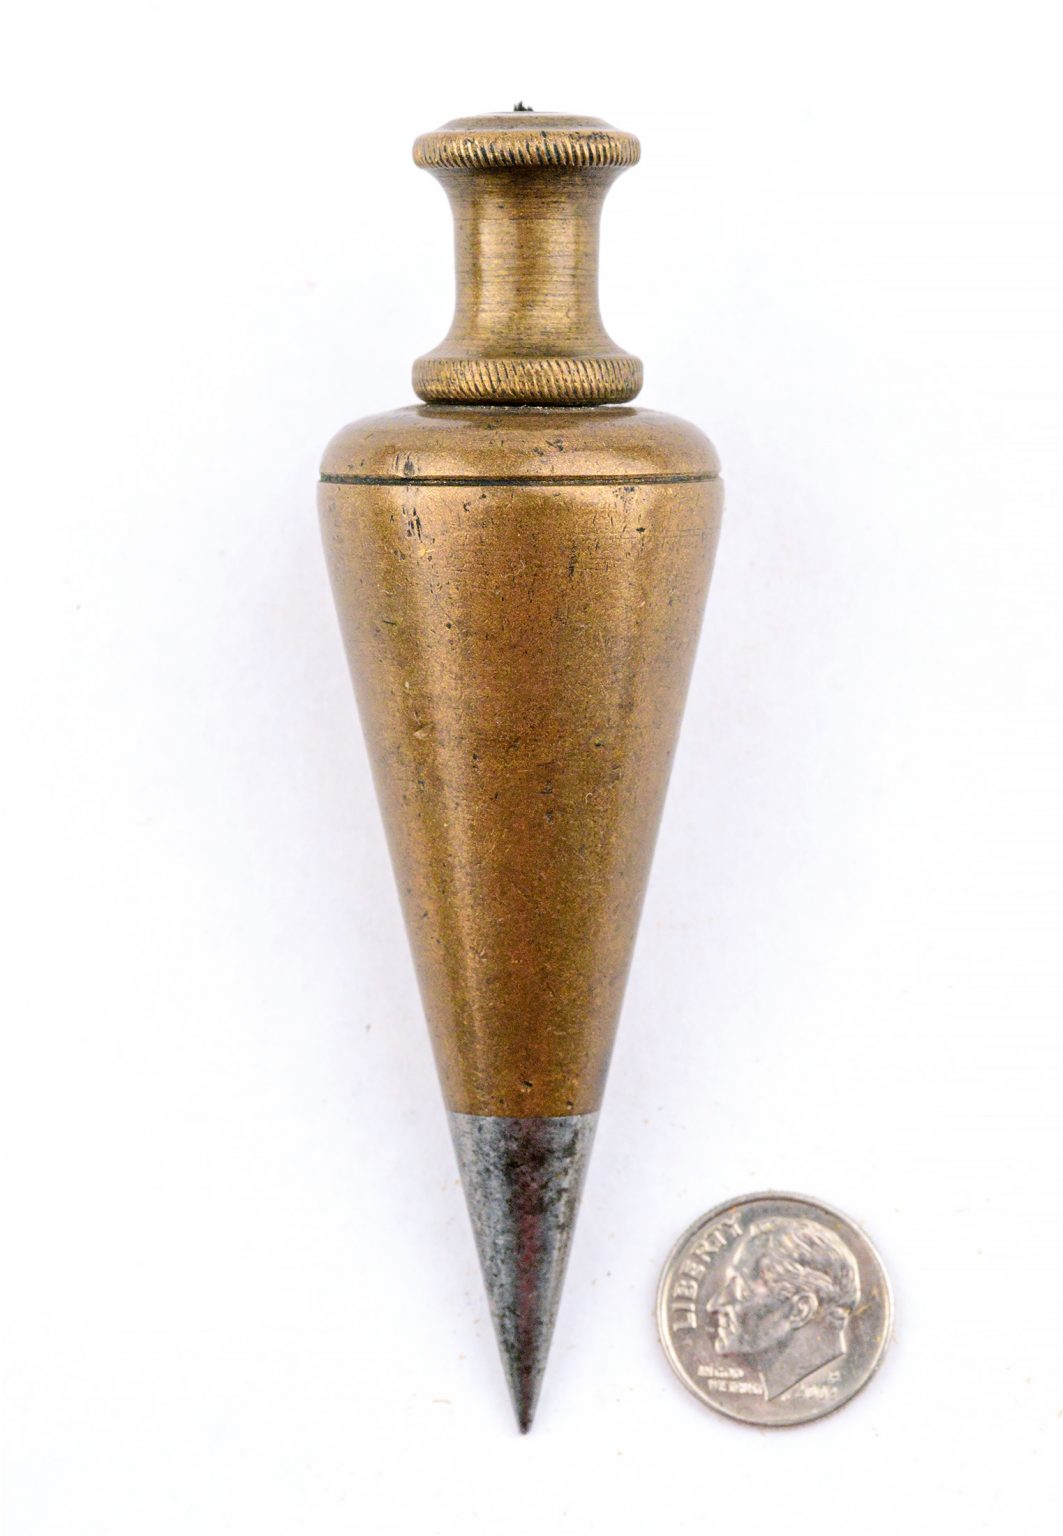 when was the plumb bob invented